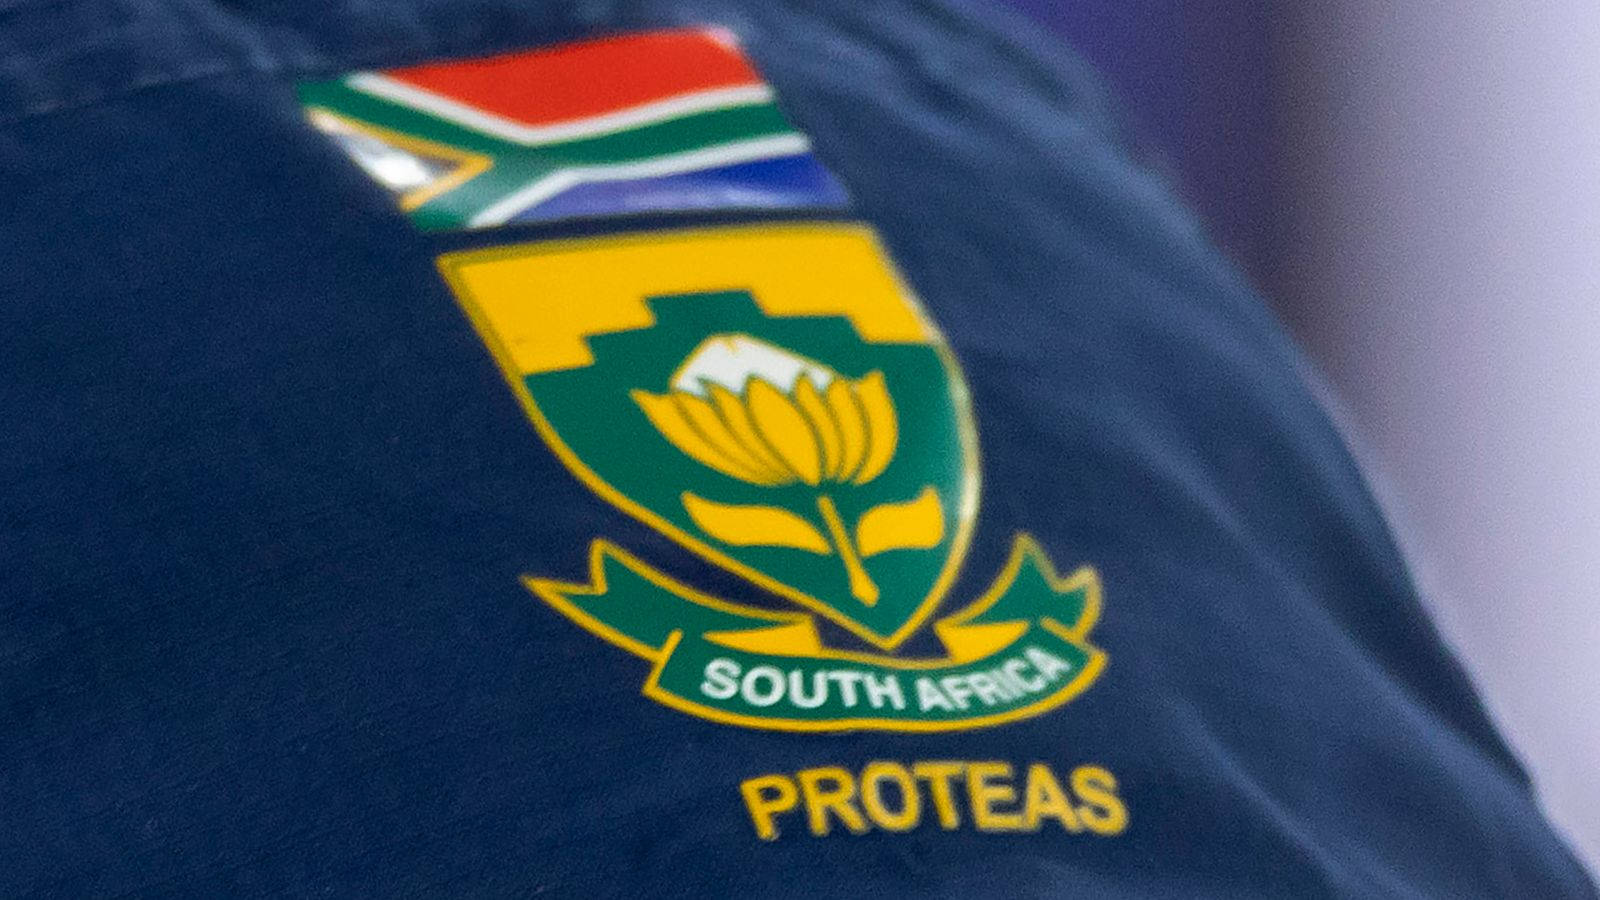 South Africa Cricket Logo In Shirt Background